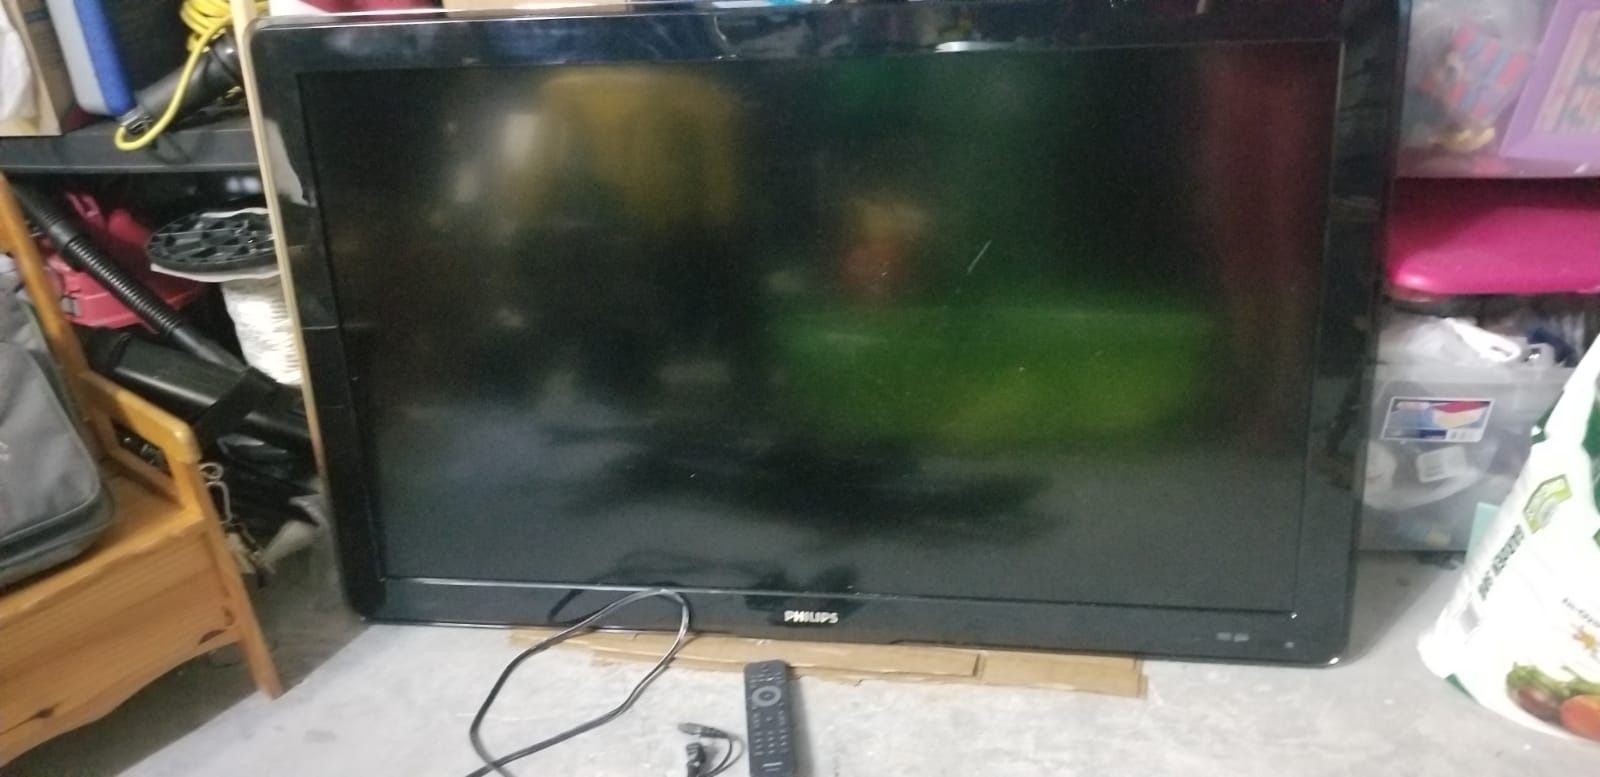 Plasma TV working good. Remote control. 50 inches. No scratches(Not good picture)Great condition.